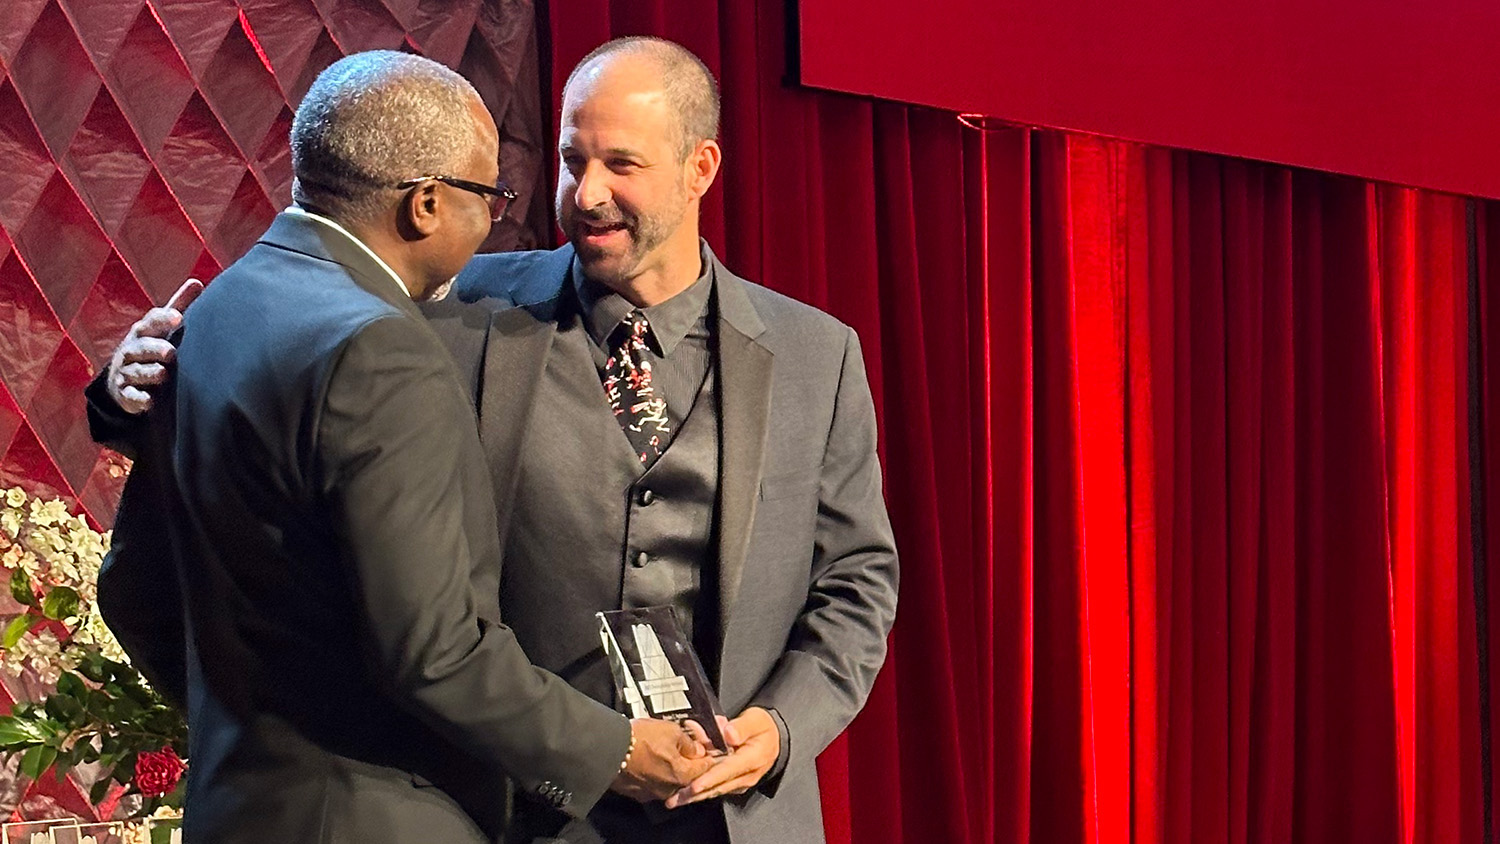 Dean Myron Floyd presents award to Braden Holloway - Braden Holloway Named 2023 Distinguished Alumnus of the Year - College of Natural Resources News NC State University